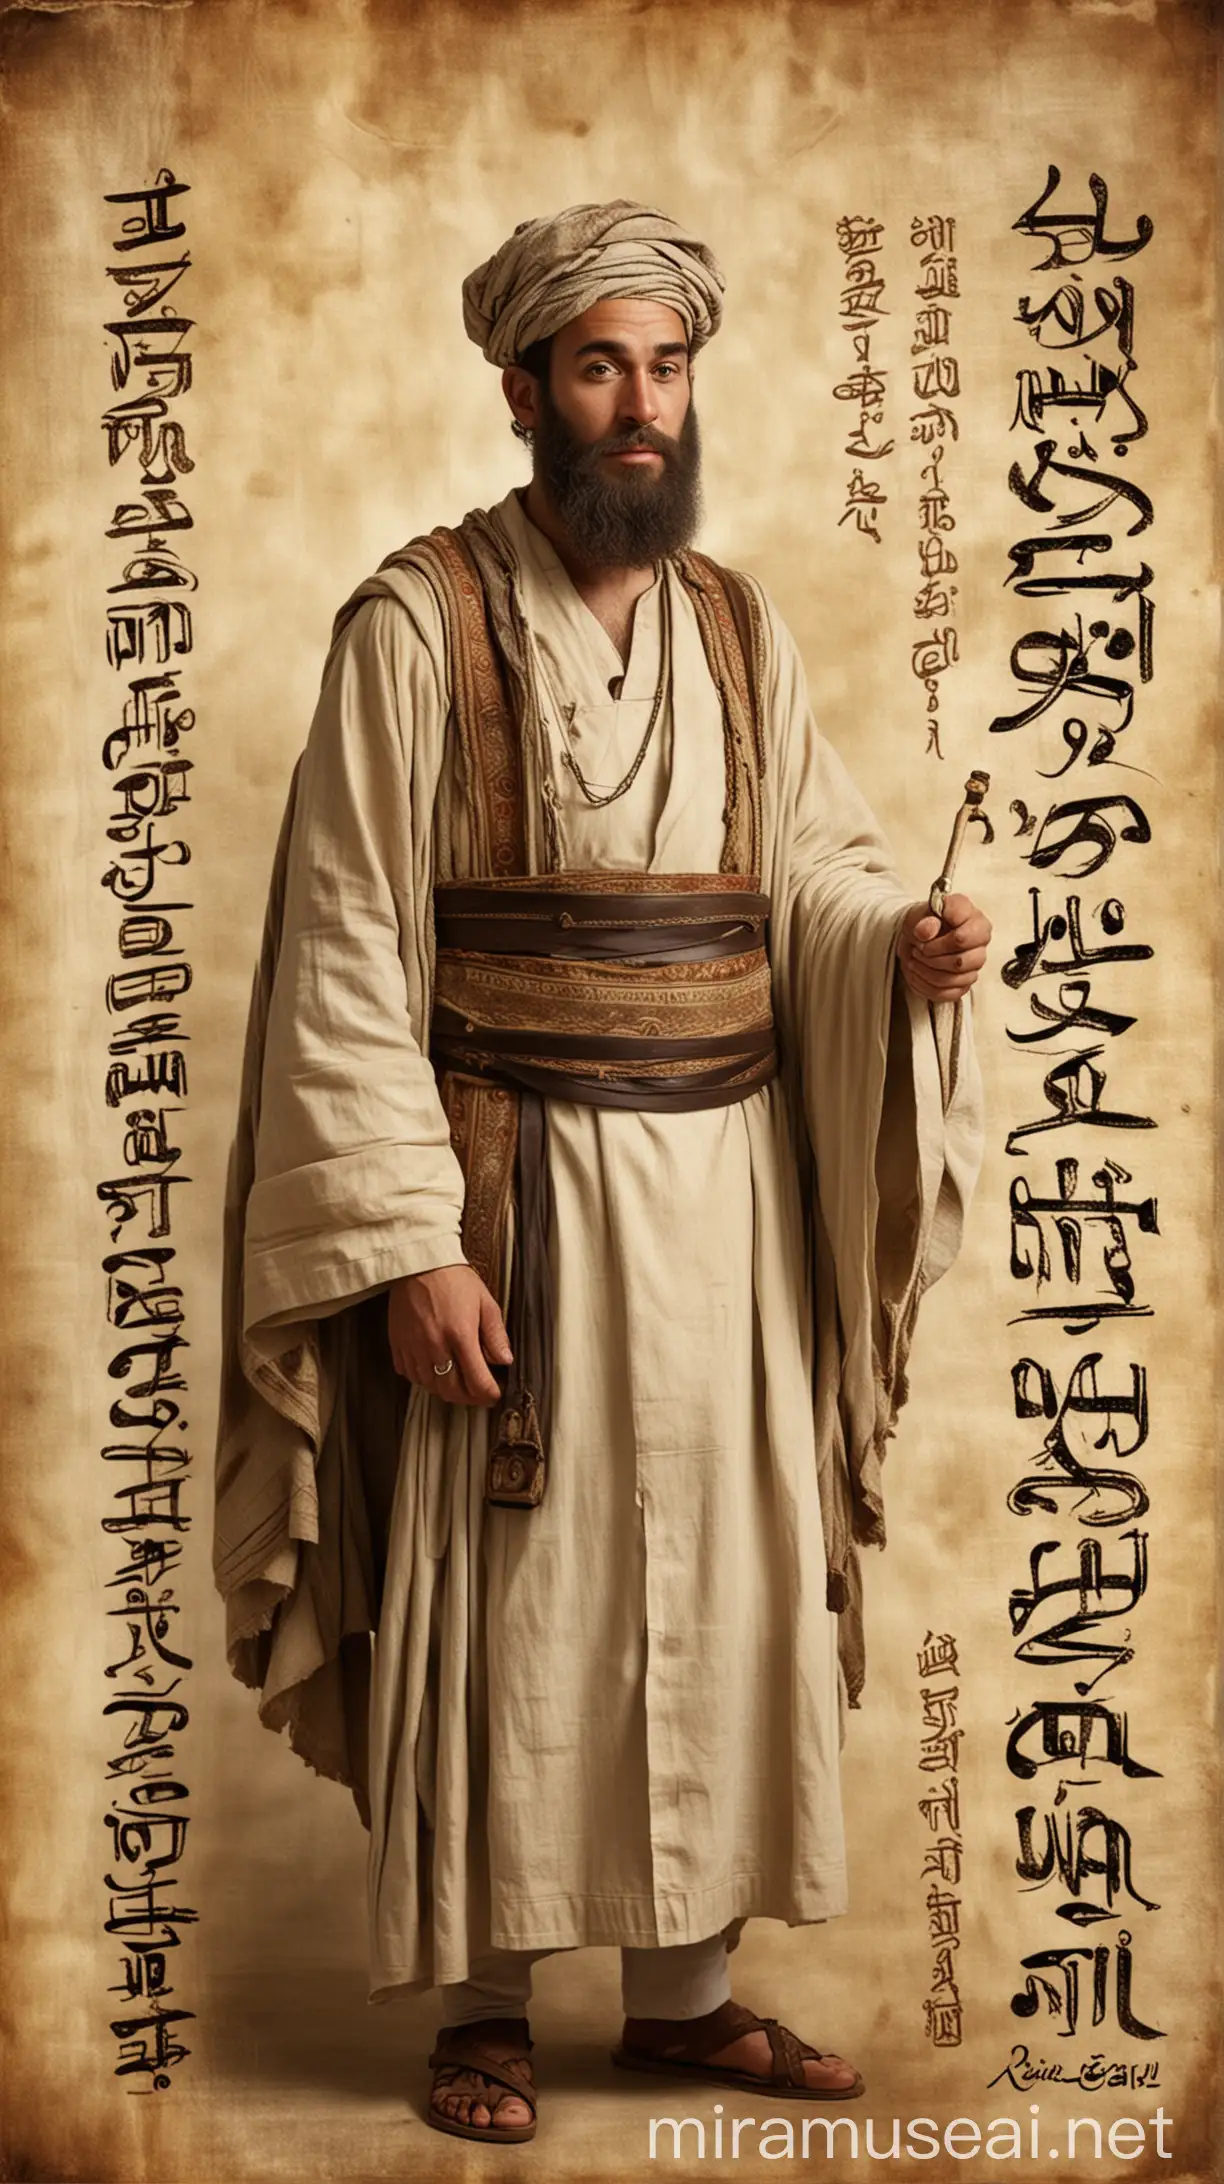 Generate an image of a wise-looking man, dressed in ancient Hebrew attire, standing beside the name 'Bukki' written in elegant Hebrew script. Below the name, include its meaning 'Wasteful' written in English. The background should evoke a sense of antiquity, perhaps with faded parchment or ancient scrolls."In ancient world 